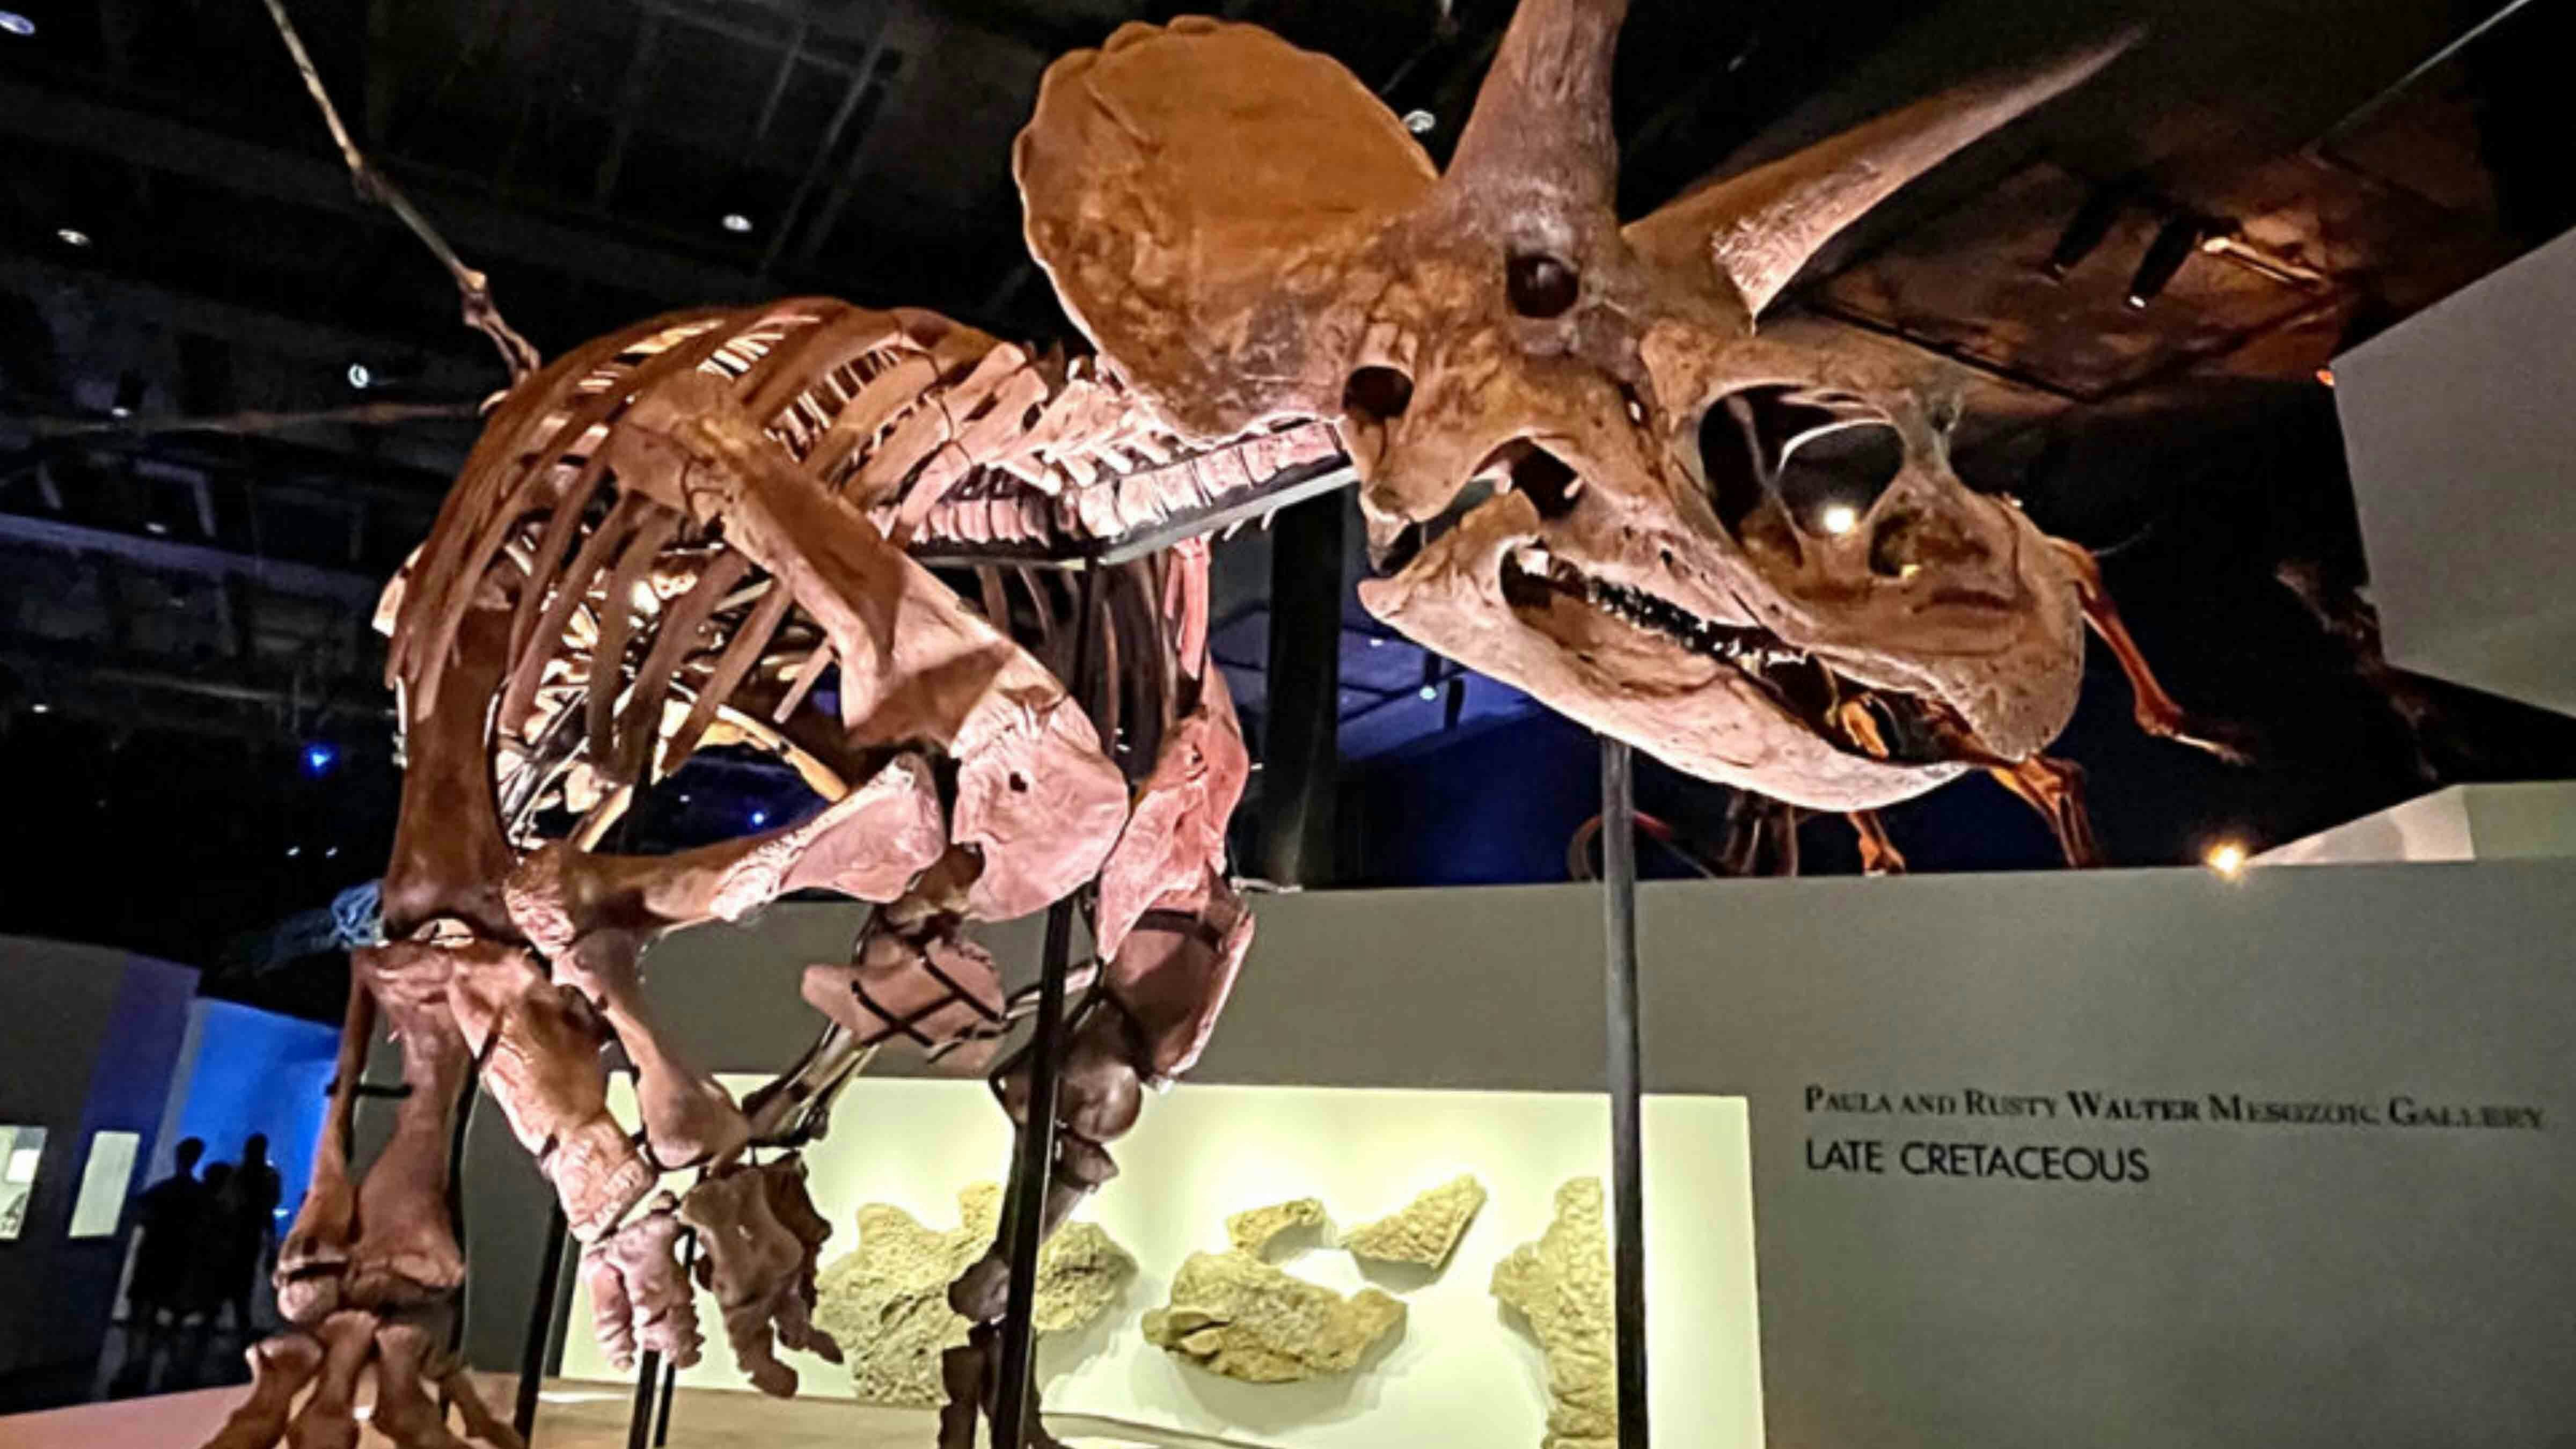 Lane the Triceratops on display in the Houston Museum of Natural History. The skeleton was found and excavated in 2002 and named after one of Leonard and Arlene Zerbst's grandchildren. Skin impressions were found in association with the bones, a rare and exciting discovery with huge scientific significance.